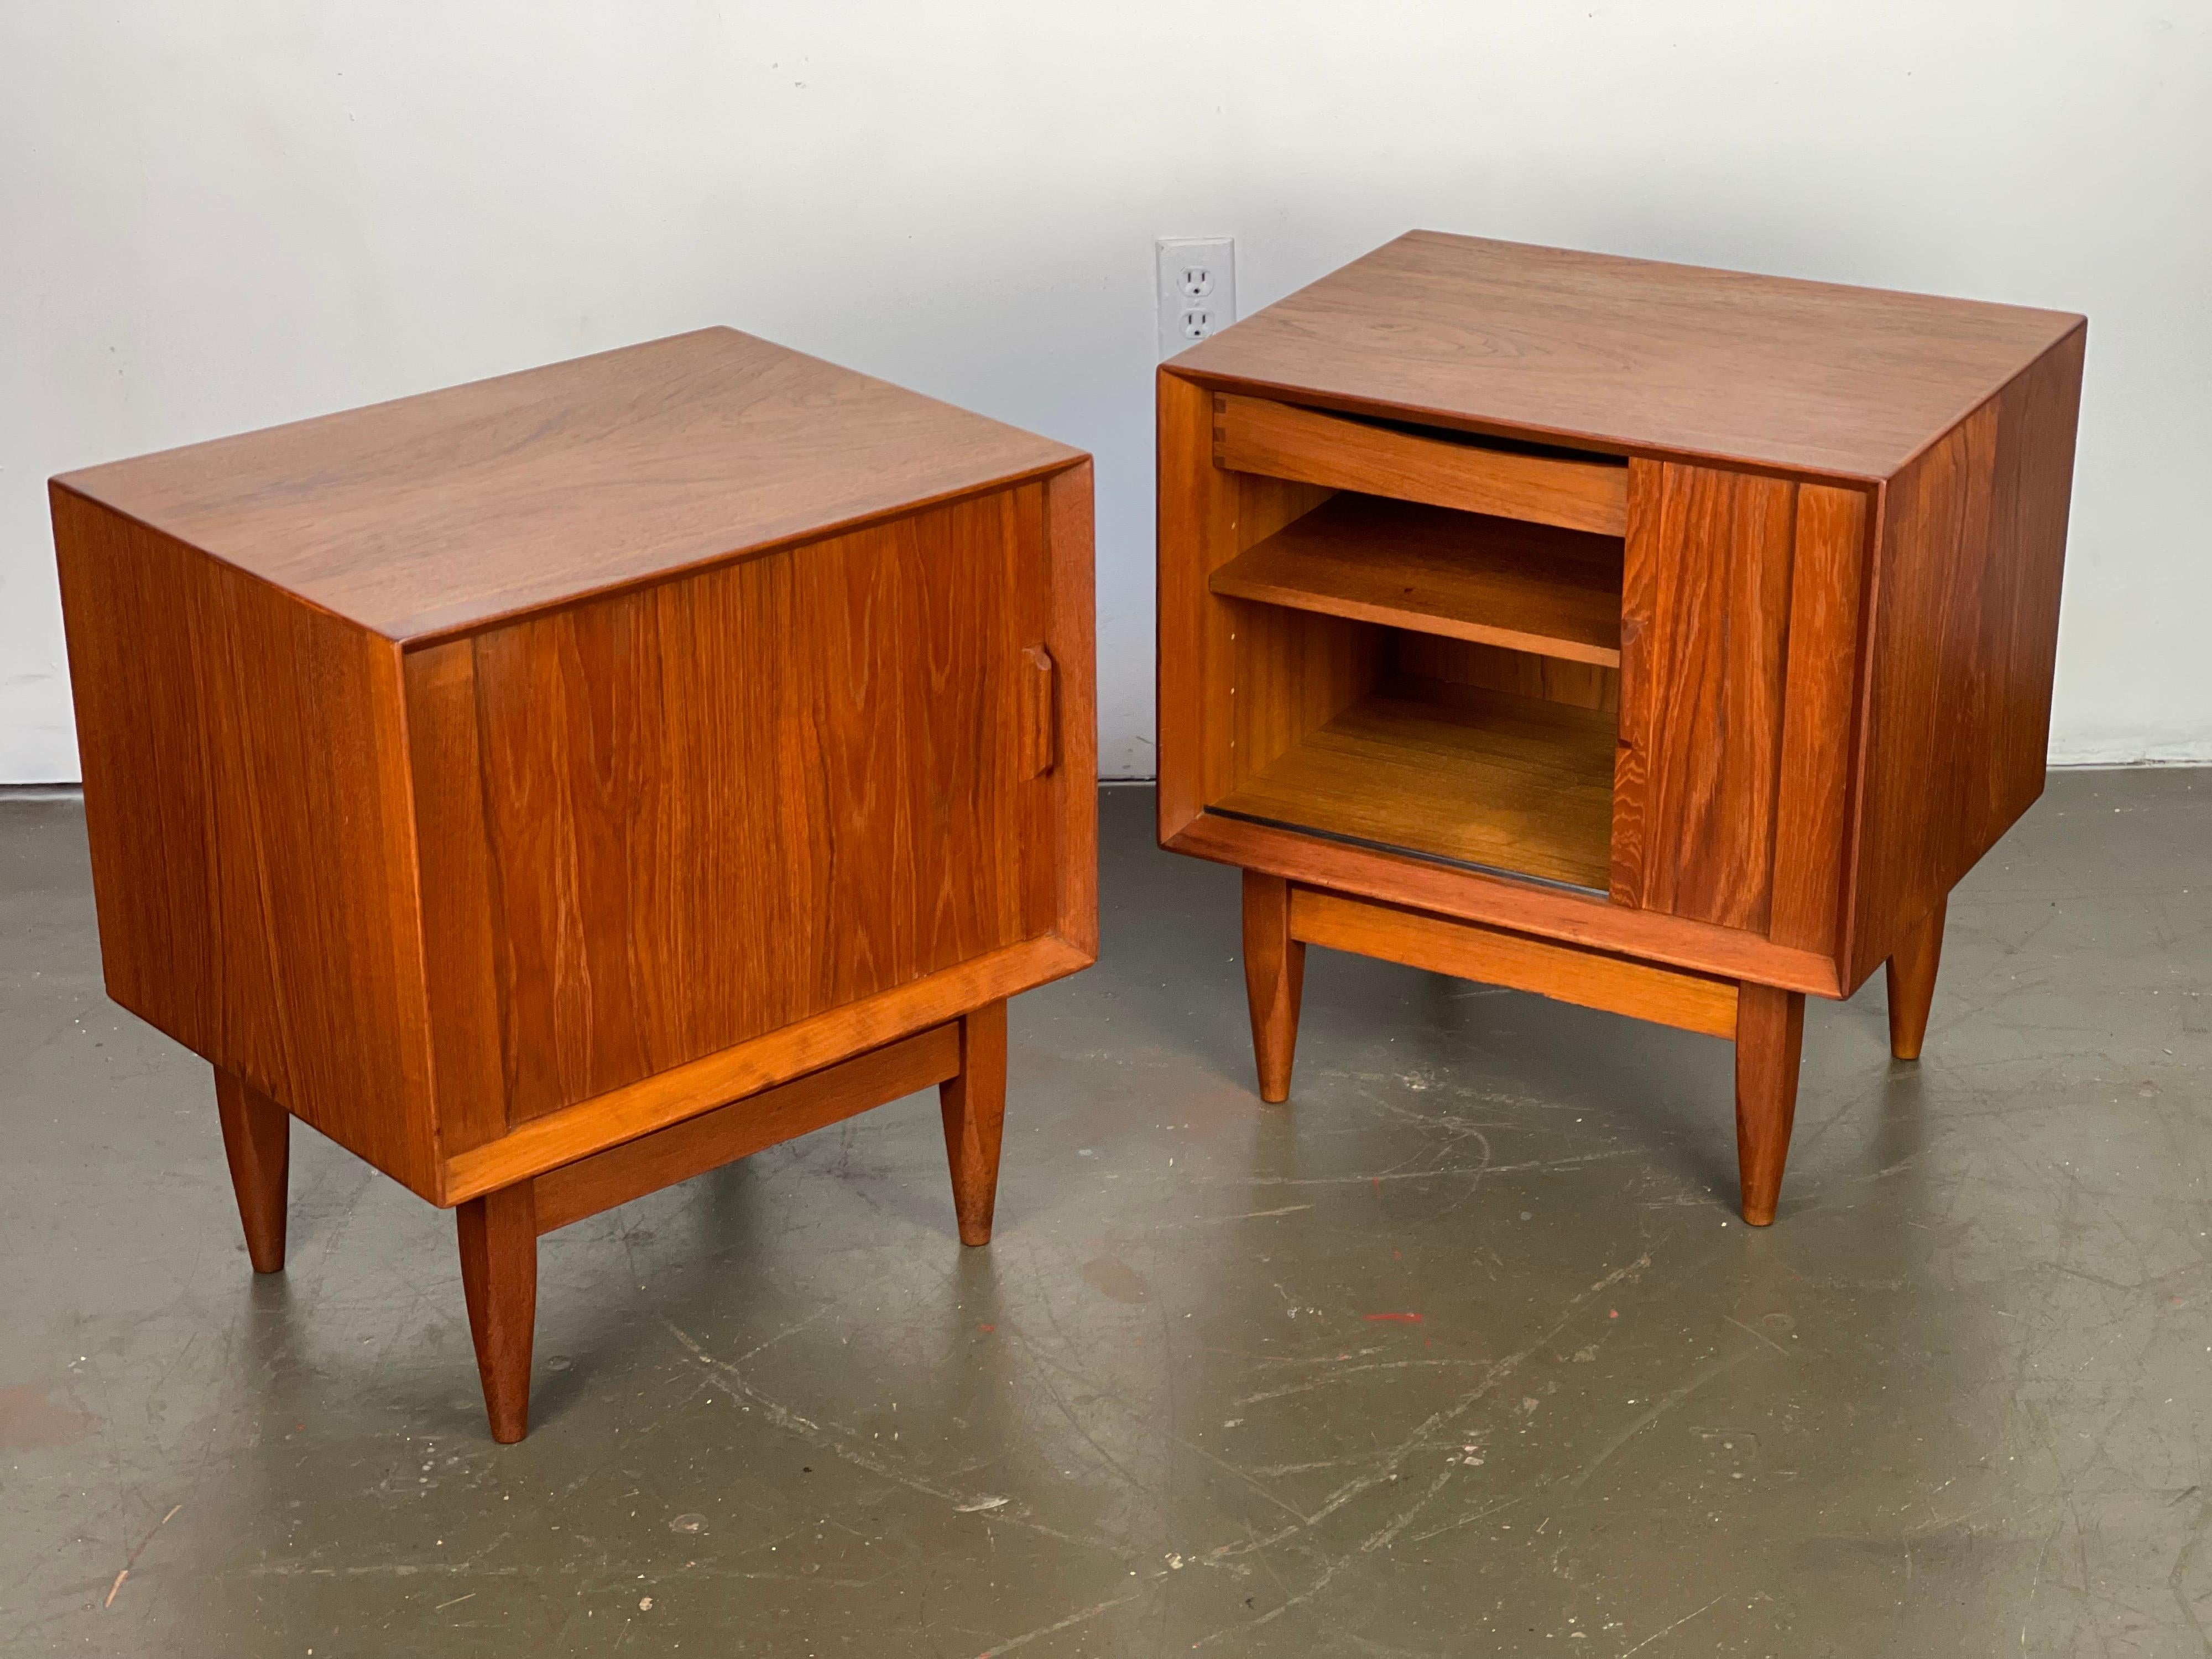 Classic set of early Danish Modern teak nightstands by Svend Madsen for Falster Moberlfrabrik of Denmark; featuring rolling tambour doors, adjustable shelves and adjustable drawers. These are great nightstands - these are early ones with the nice